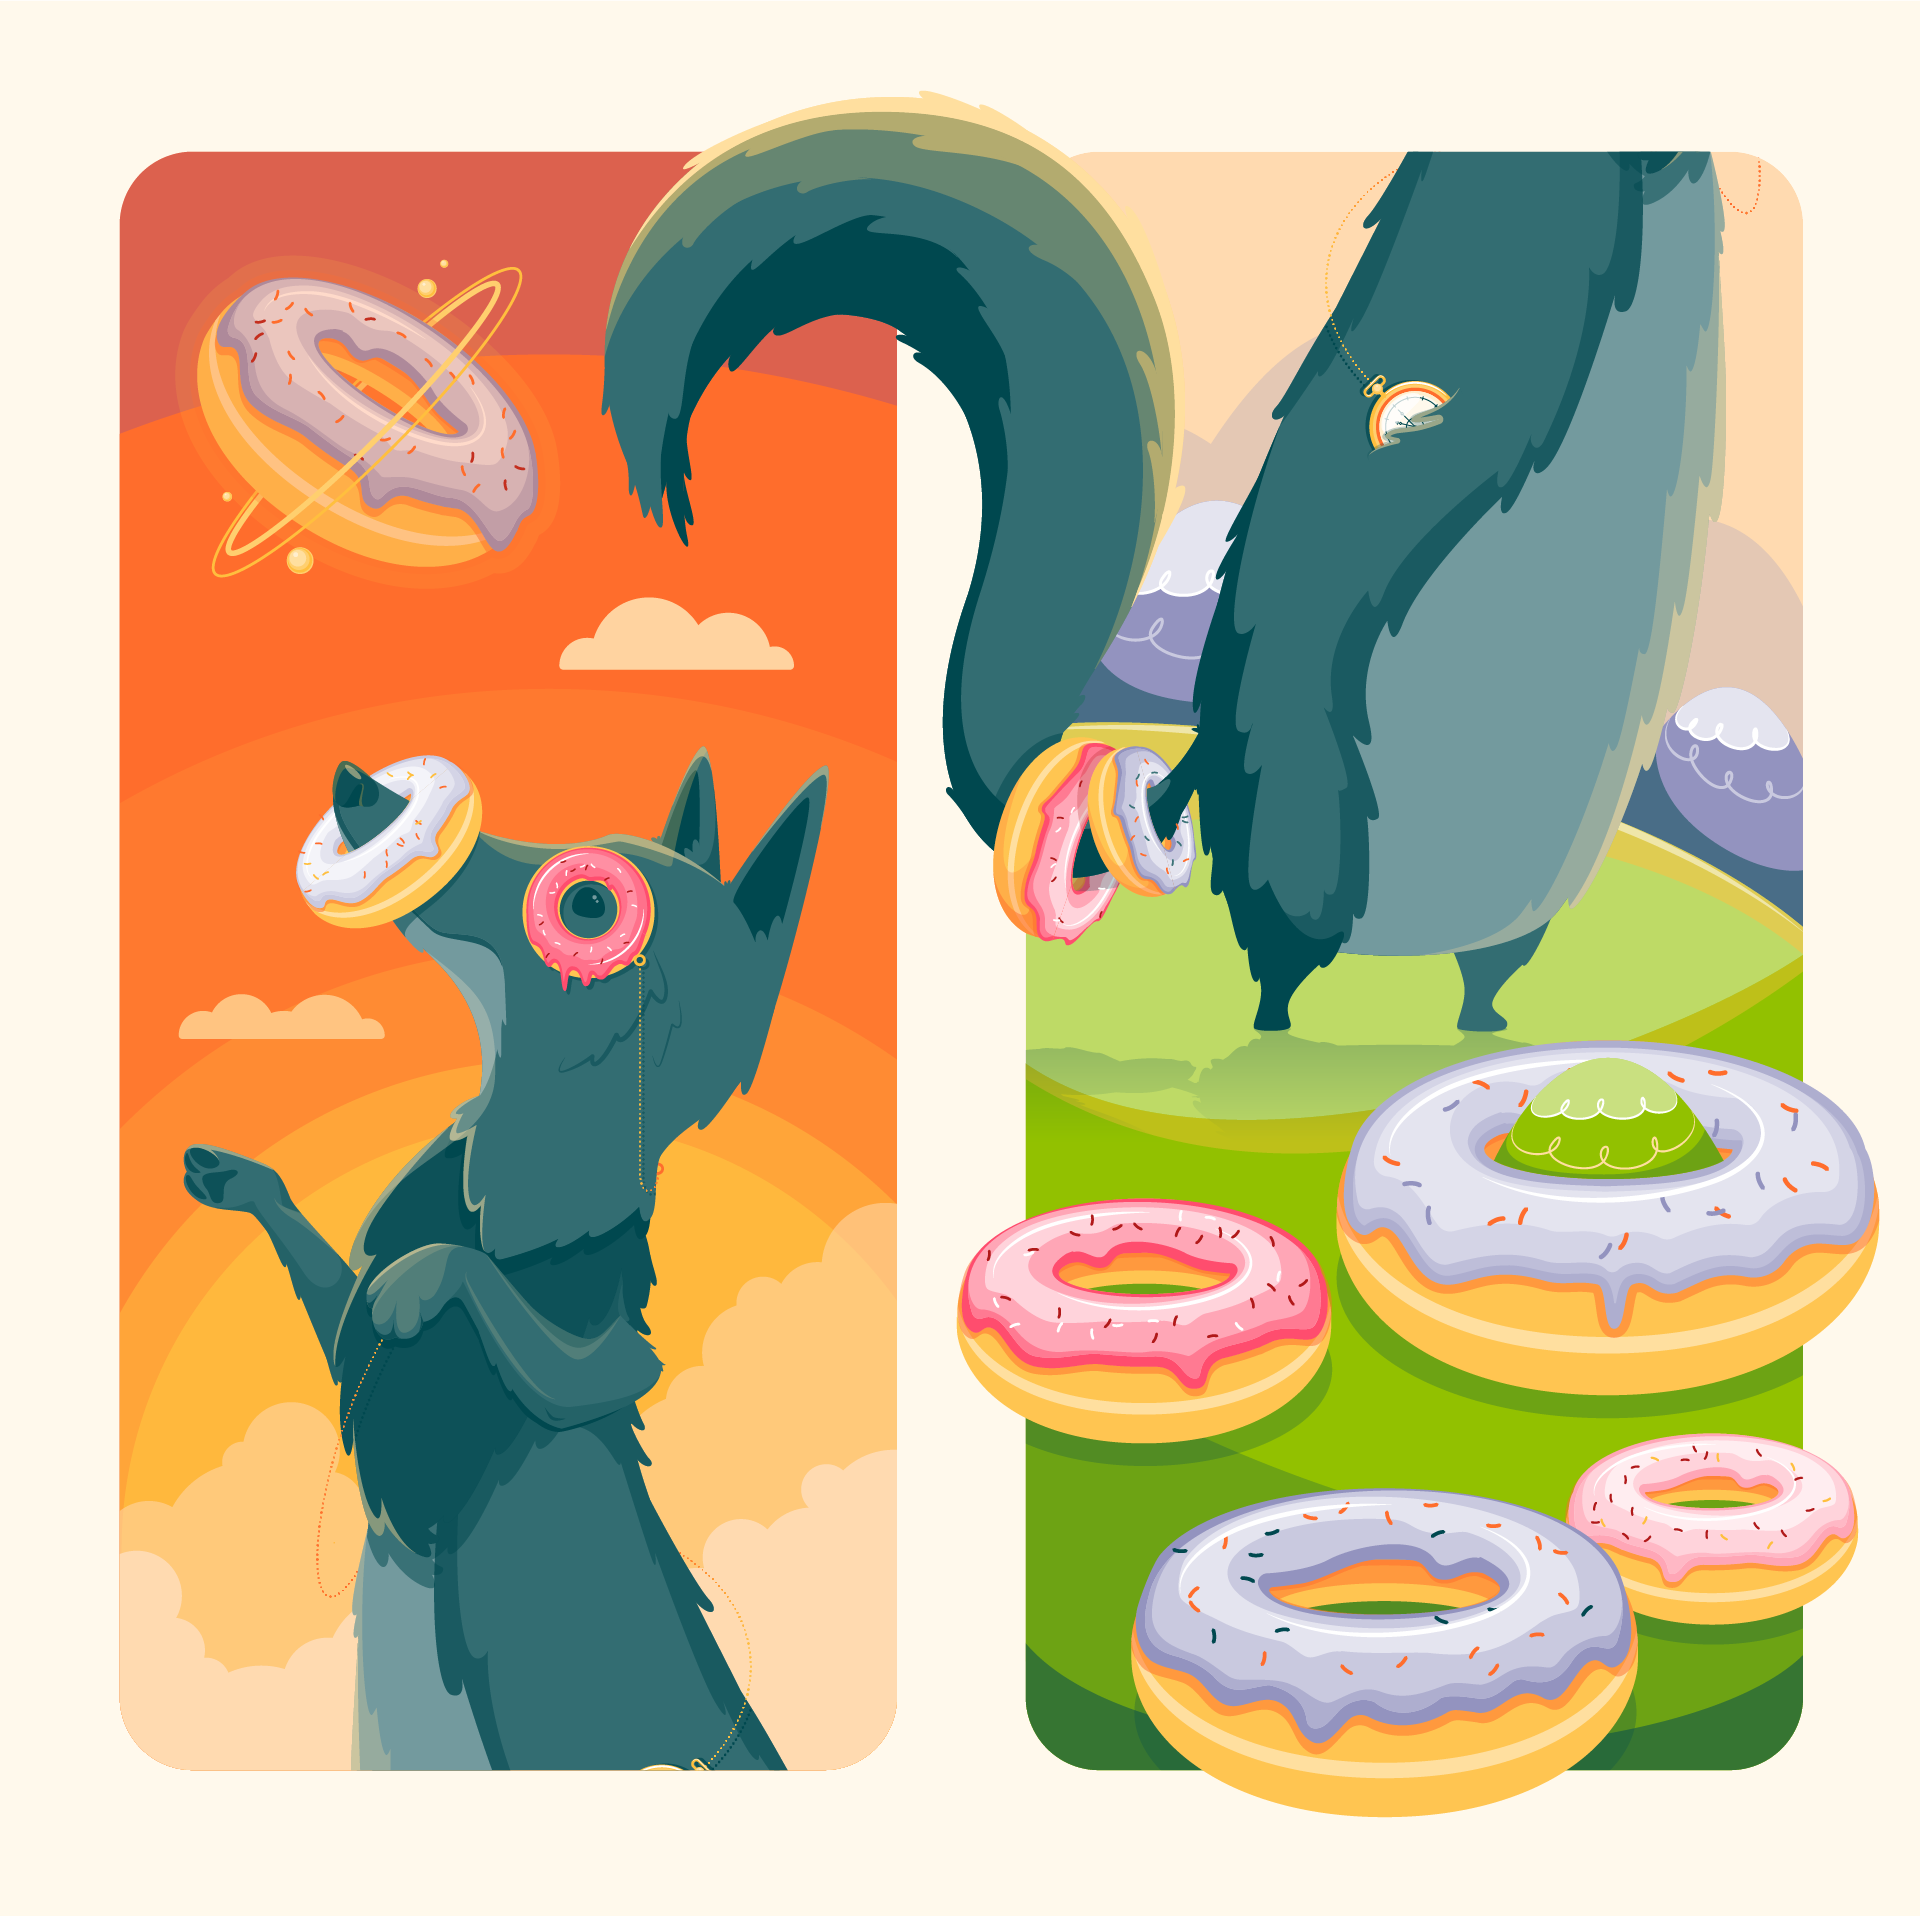 Illustration in a diptych style of a very tall dog on it's hind legs reaching up towards the sky. There's a donut around it's snout, it wears a donut monocle, and donuts dot the landscape below.